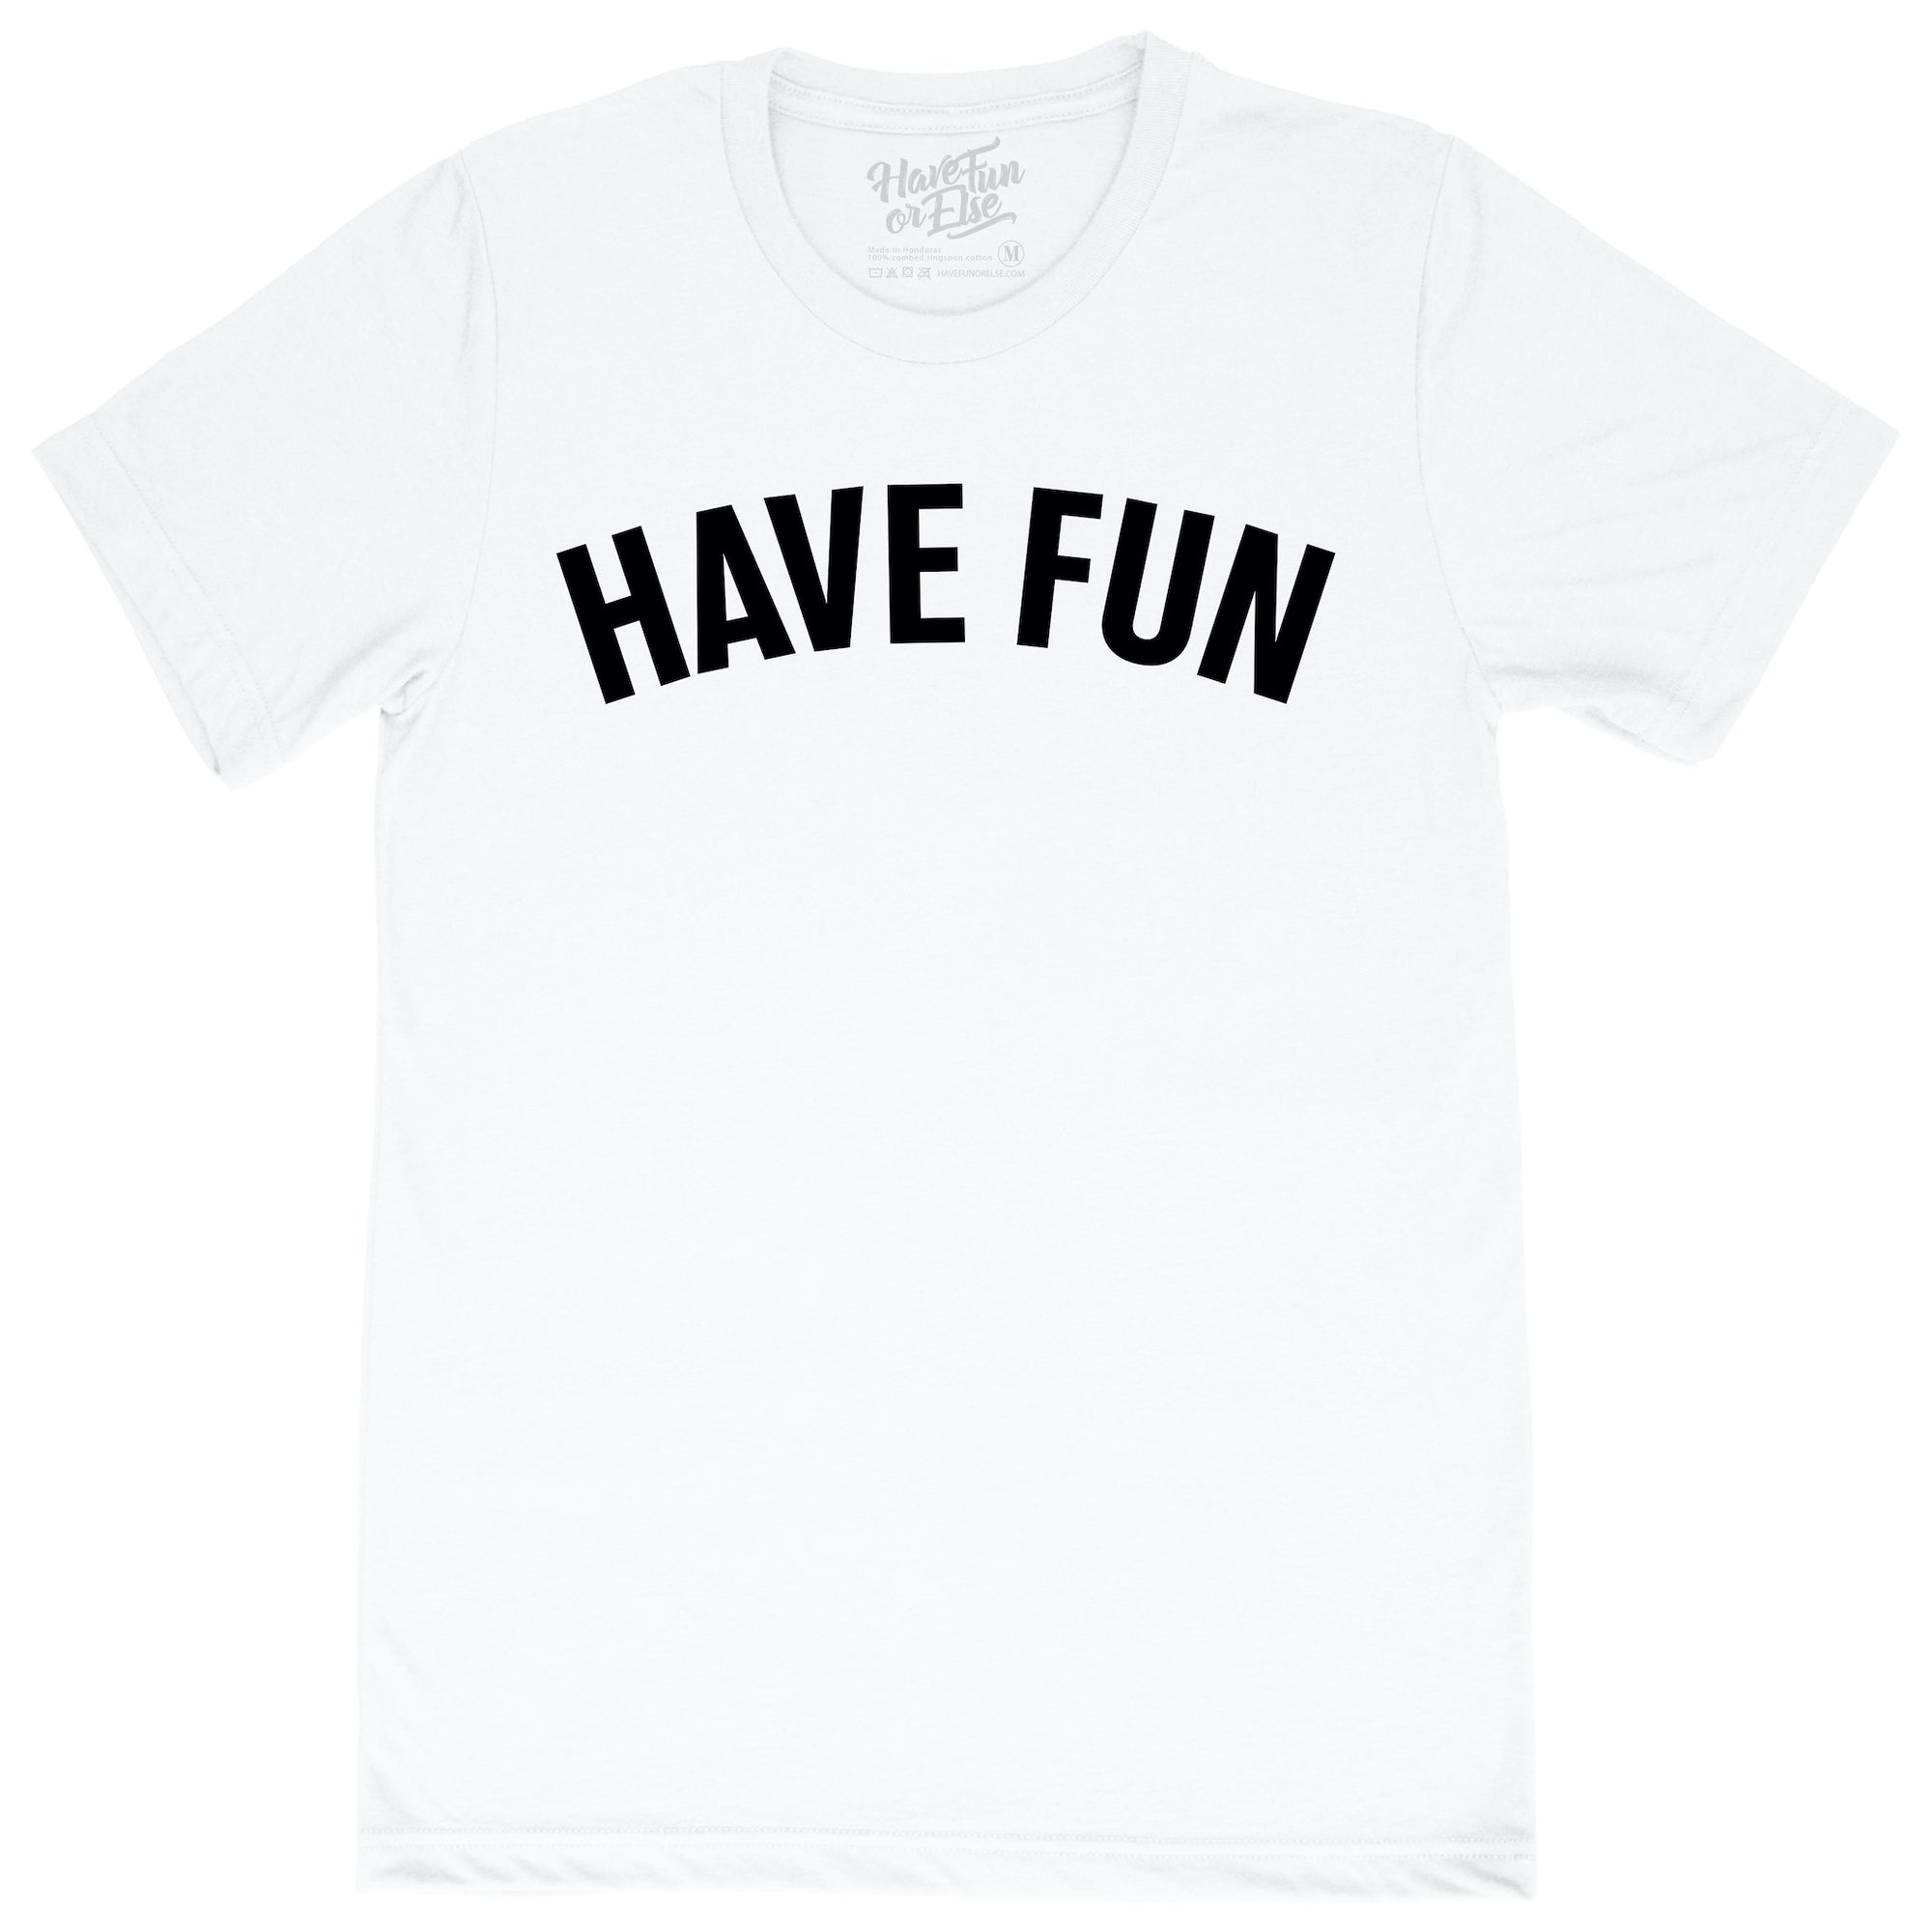 Have Fun Or Else Have Fun white tee